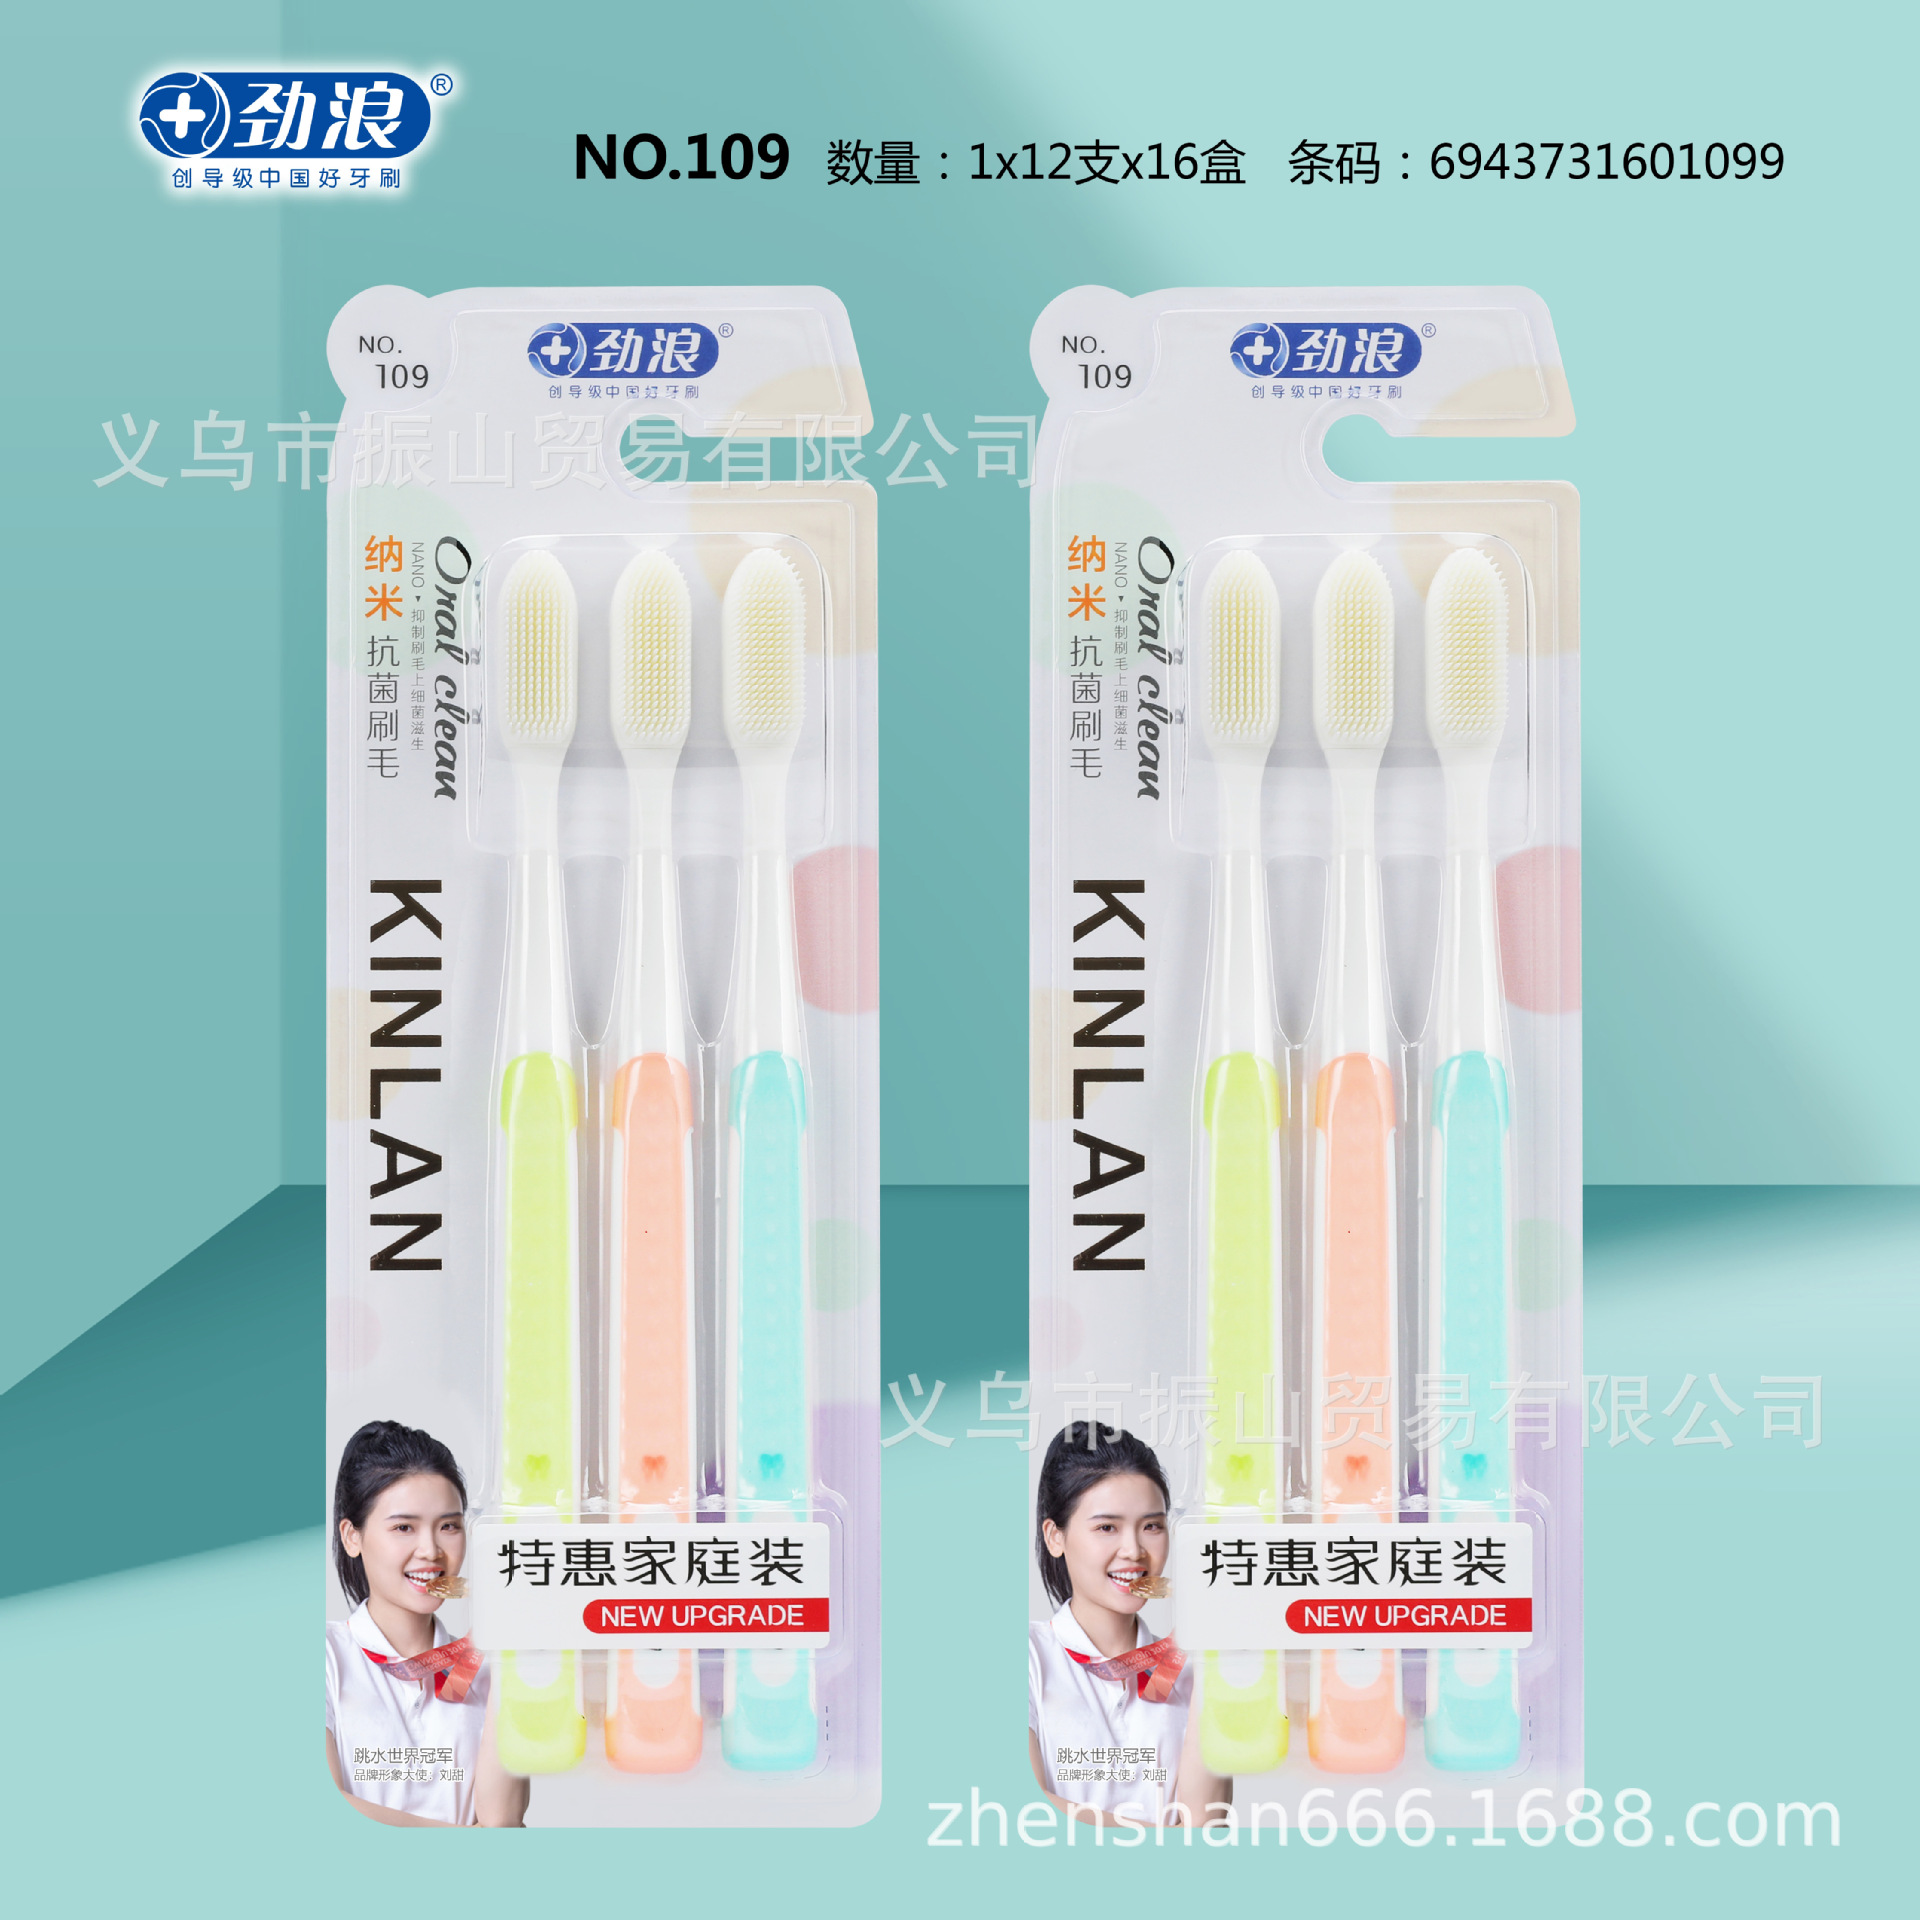 Jinlang 109 Special Offer Family Pack Nano Toothbrush